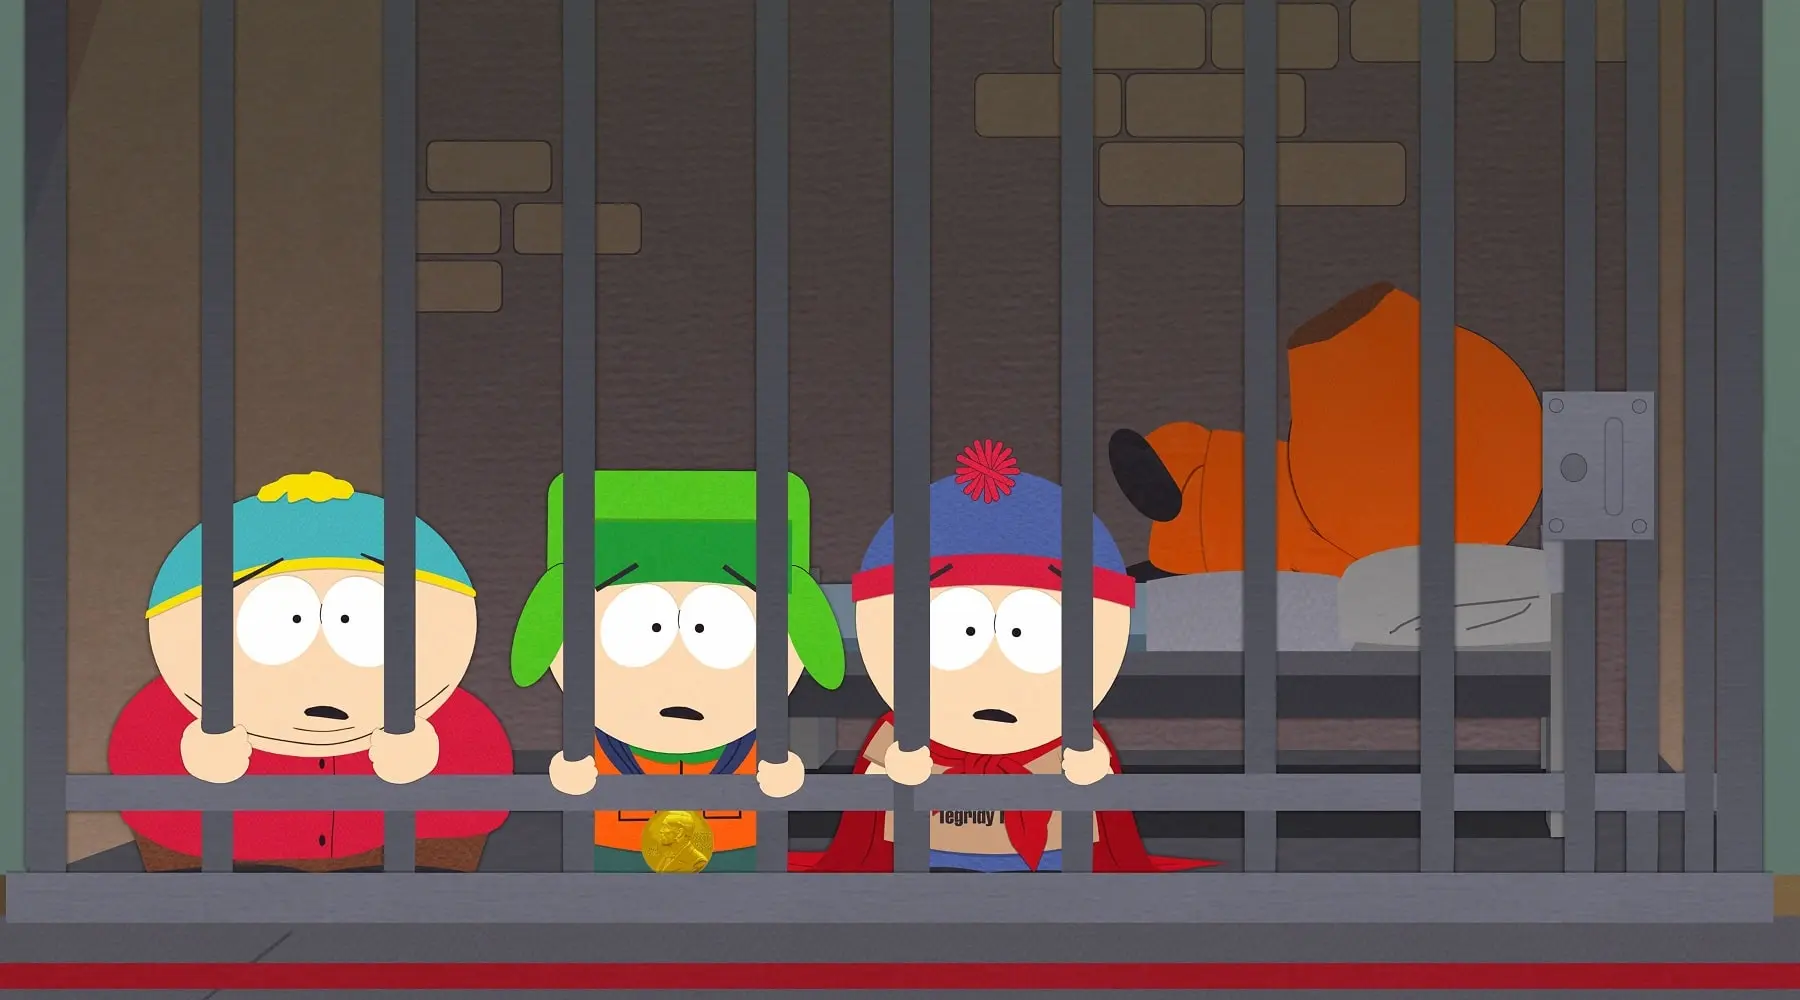 South Park Streaming Wars End By Taking Piss out of Crypto